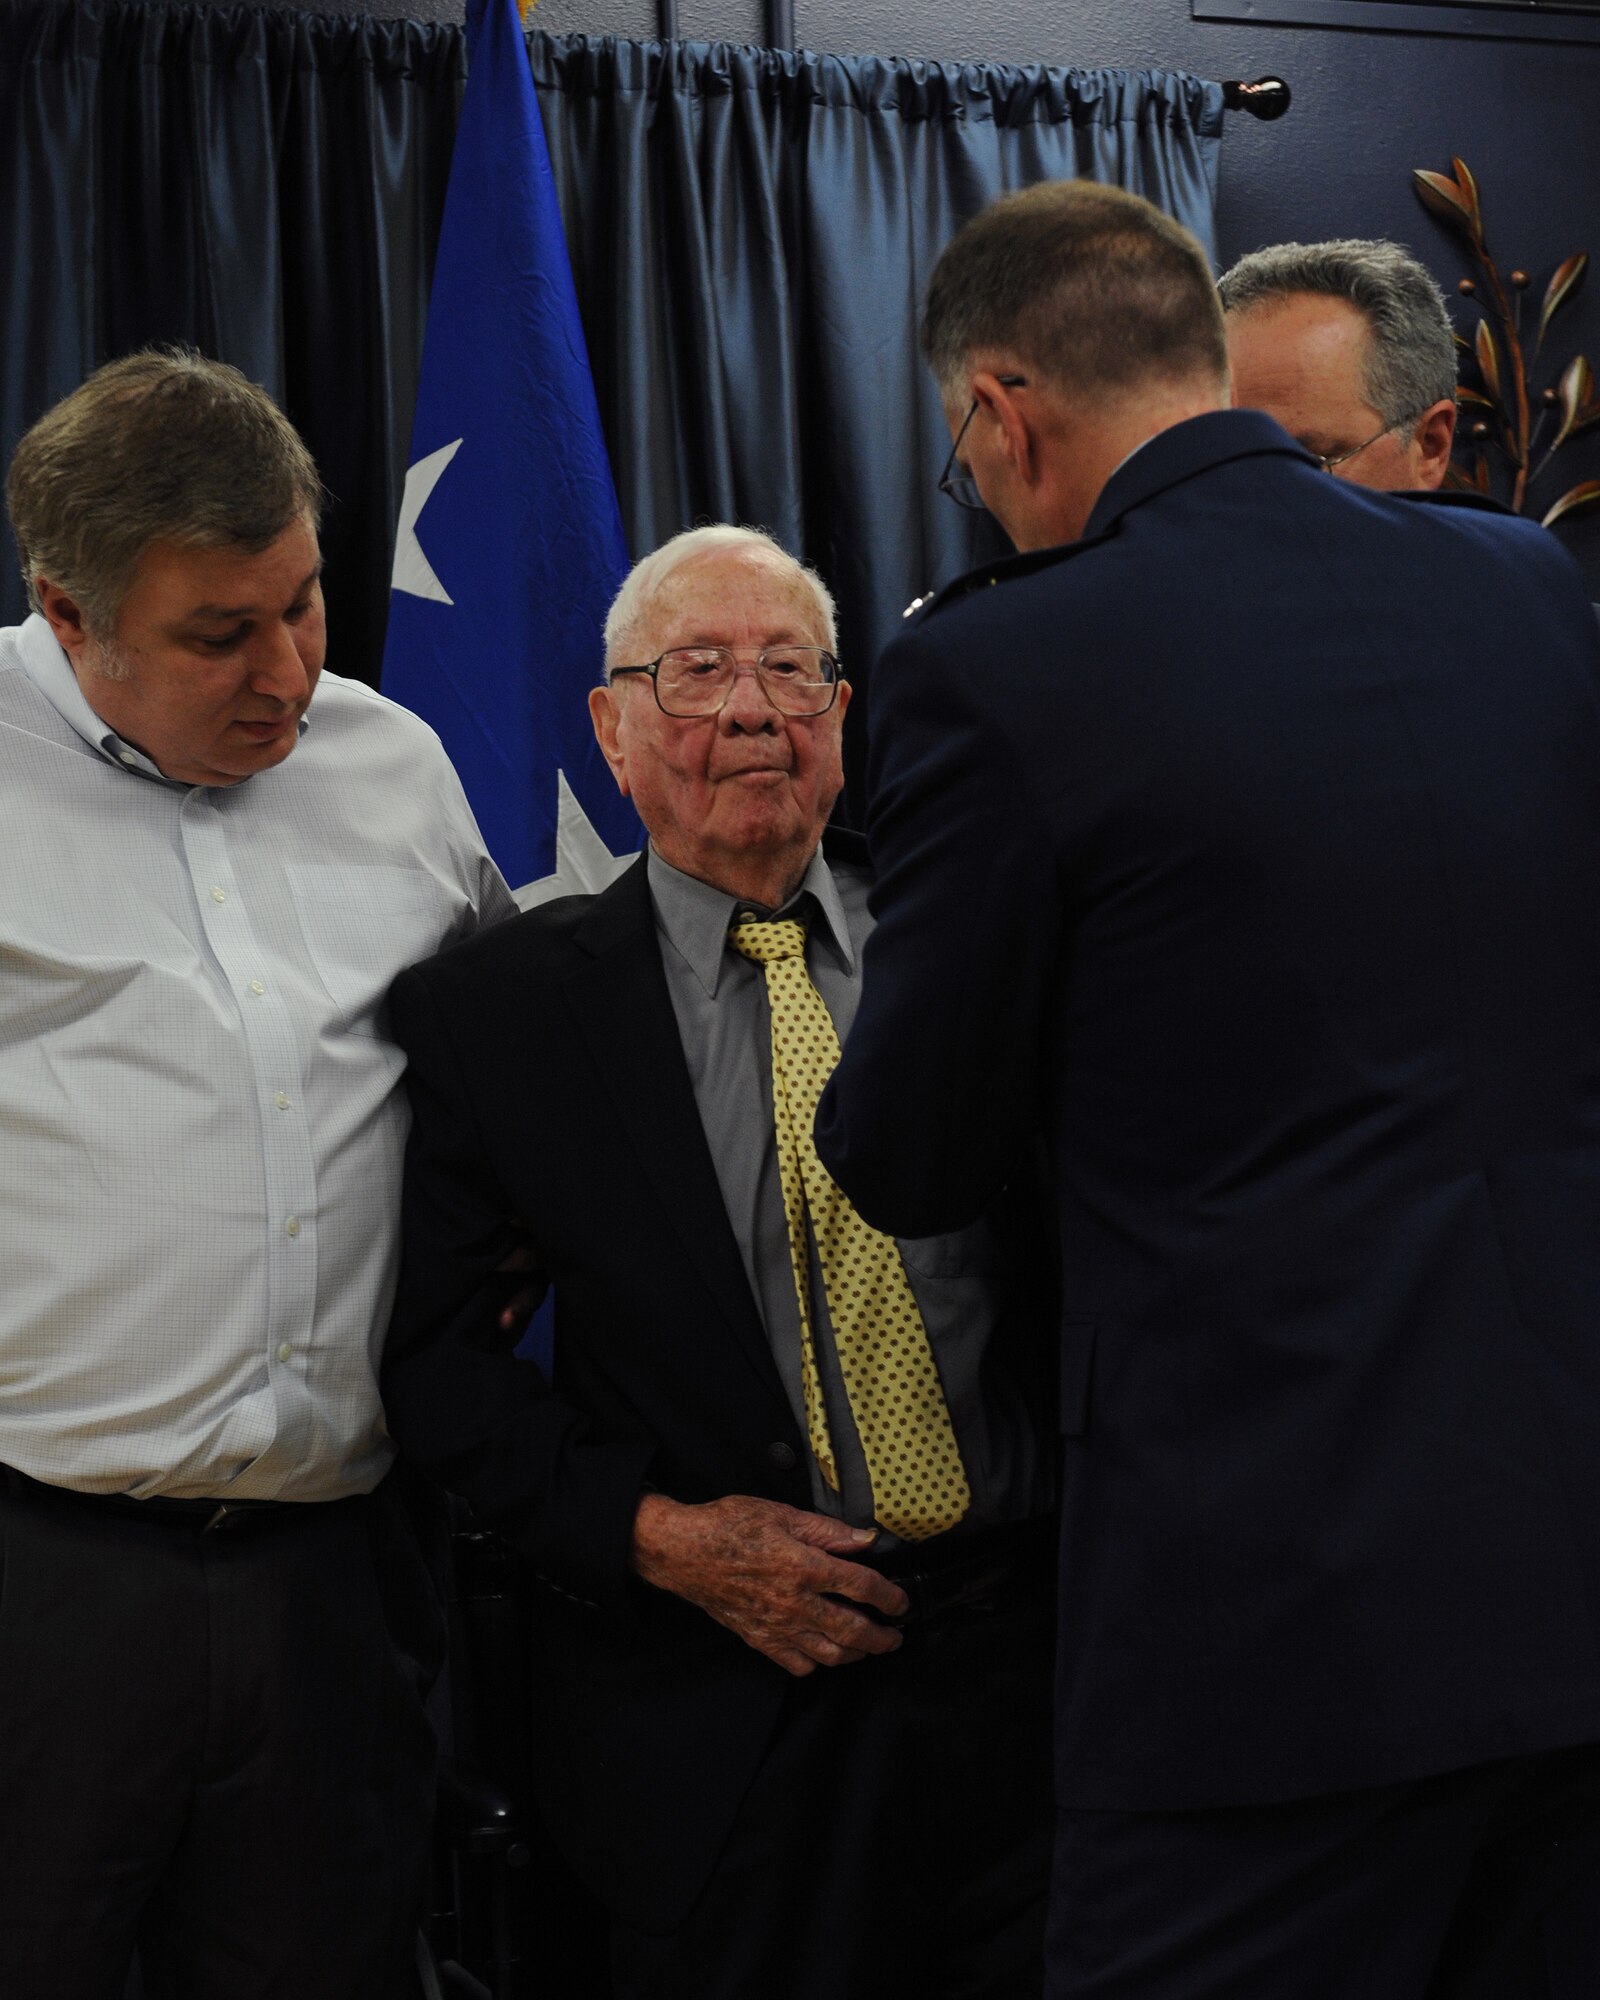 John Carpenter, a World War II veteran, receives the French Legion of Honor from Maj. Gen. Scott Vander Hamm, 8th Air Force commander, on Barksdale Air Force Base, La., July 1, 2014. More than 70 years after the Invasion of Normandy, John Carpenter, a local veteran who participated in the Invasion of Normandy and Battle of the Bulge received the French Legion of Honor. (U.S. Air Force photo/Senior Airman Benjamin Gonsier)